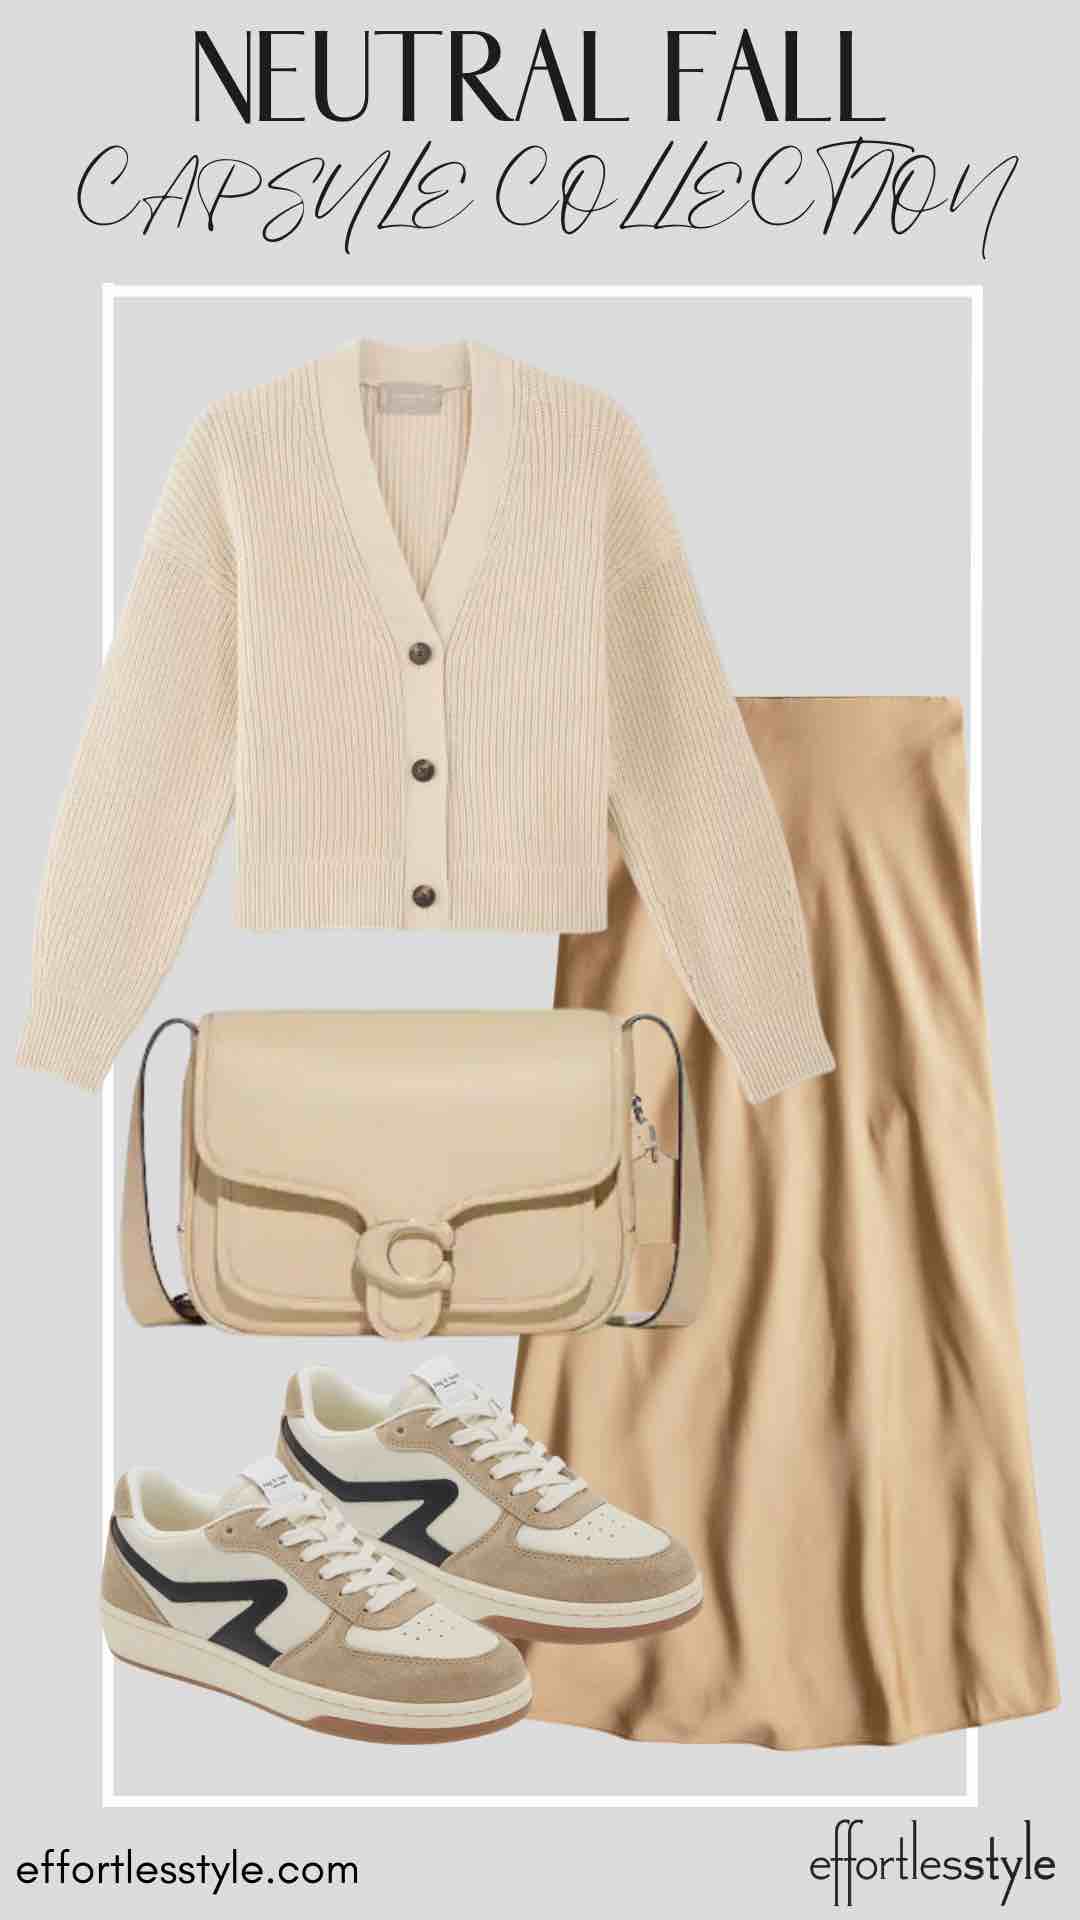 How To Wear Our Neutral Fall Capsule Wardrobe - Part 2 Cardigan & Slip Skirt fall travel style inspiration what to wear for fall travel how to wear sneakers with a slip skirt how to create a tone on tone look for fall the best neutral fall pieces how to create a natural fall wardrobe how to create a versatile fall wardrobe